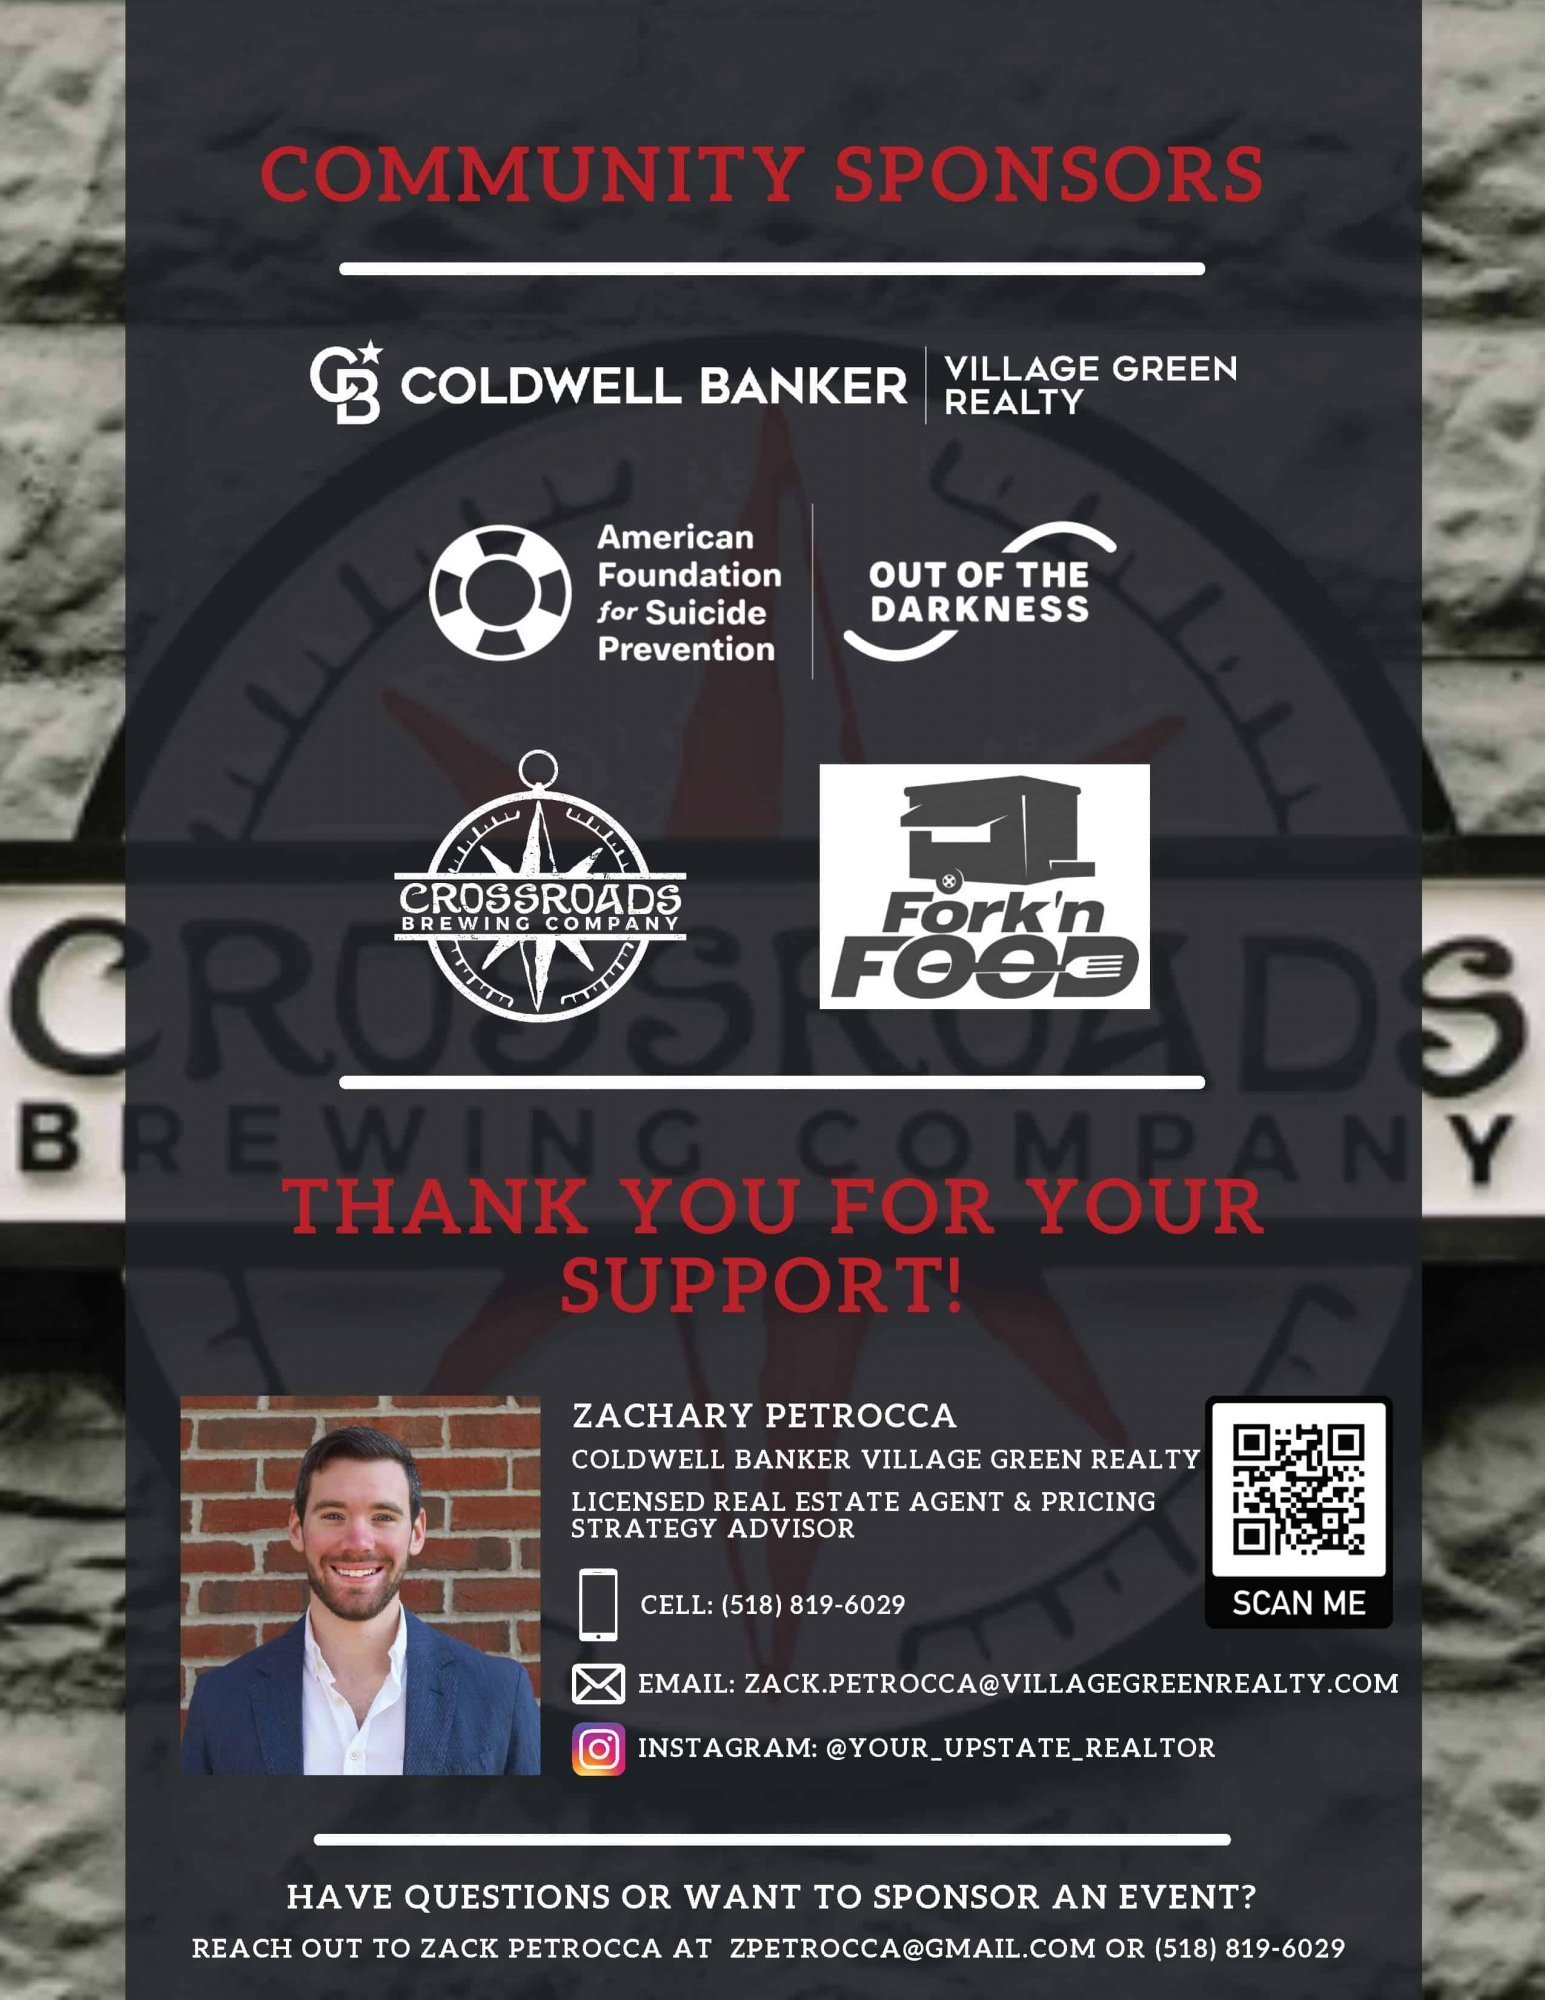 image of flyer of event sponsors. Coldwell Banker Village Green Realty, Fork'n food, crossroads brewing company, and the american foundation for suicide prevention. Thank you for your support!